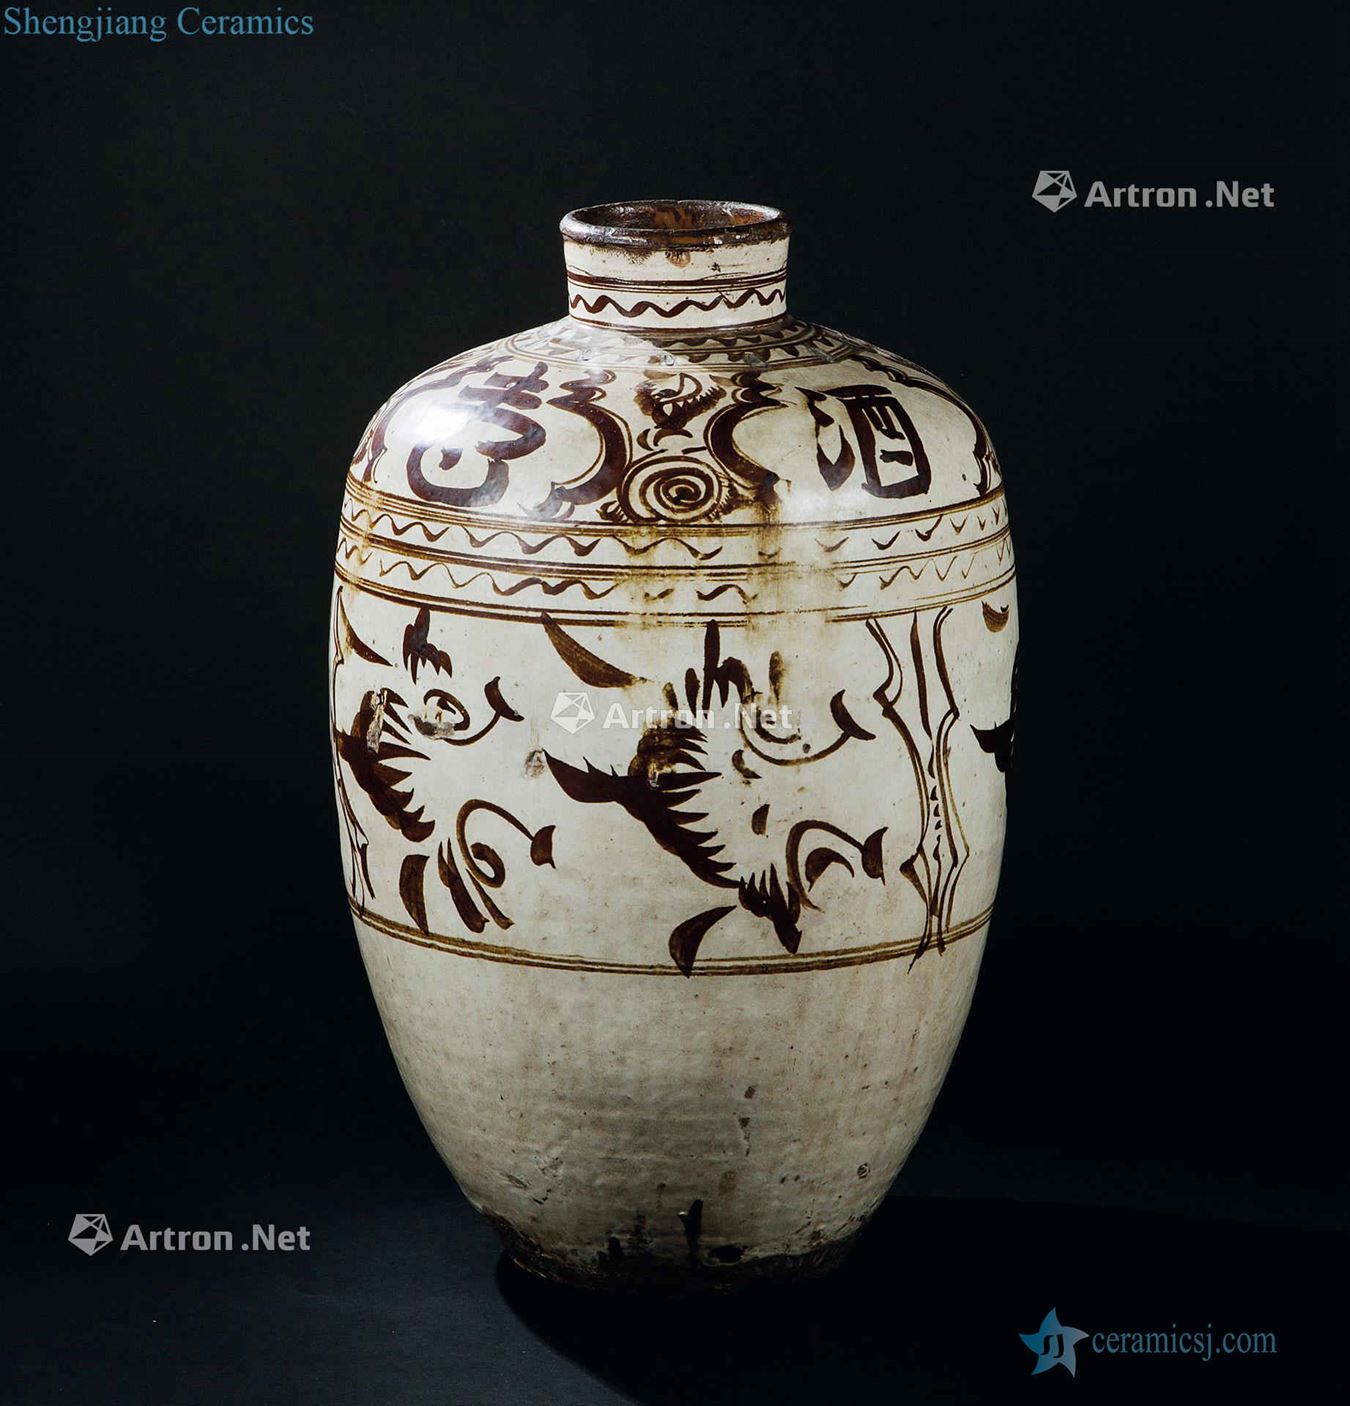 The yuan dynasty, Ming dynasty (1279-1644) magnetic state kiln flower grain big hip flask